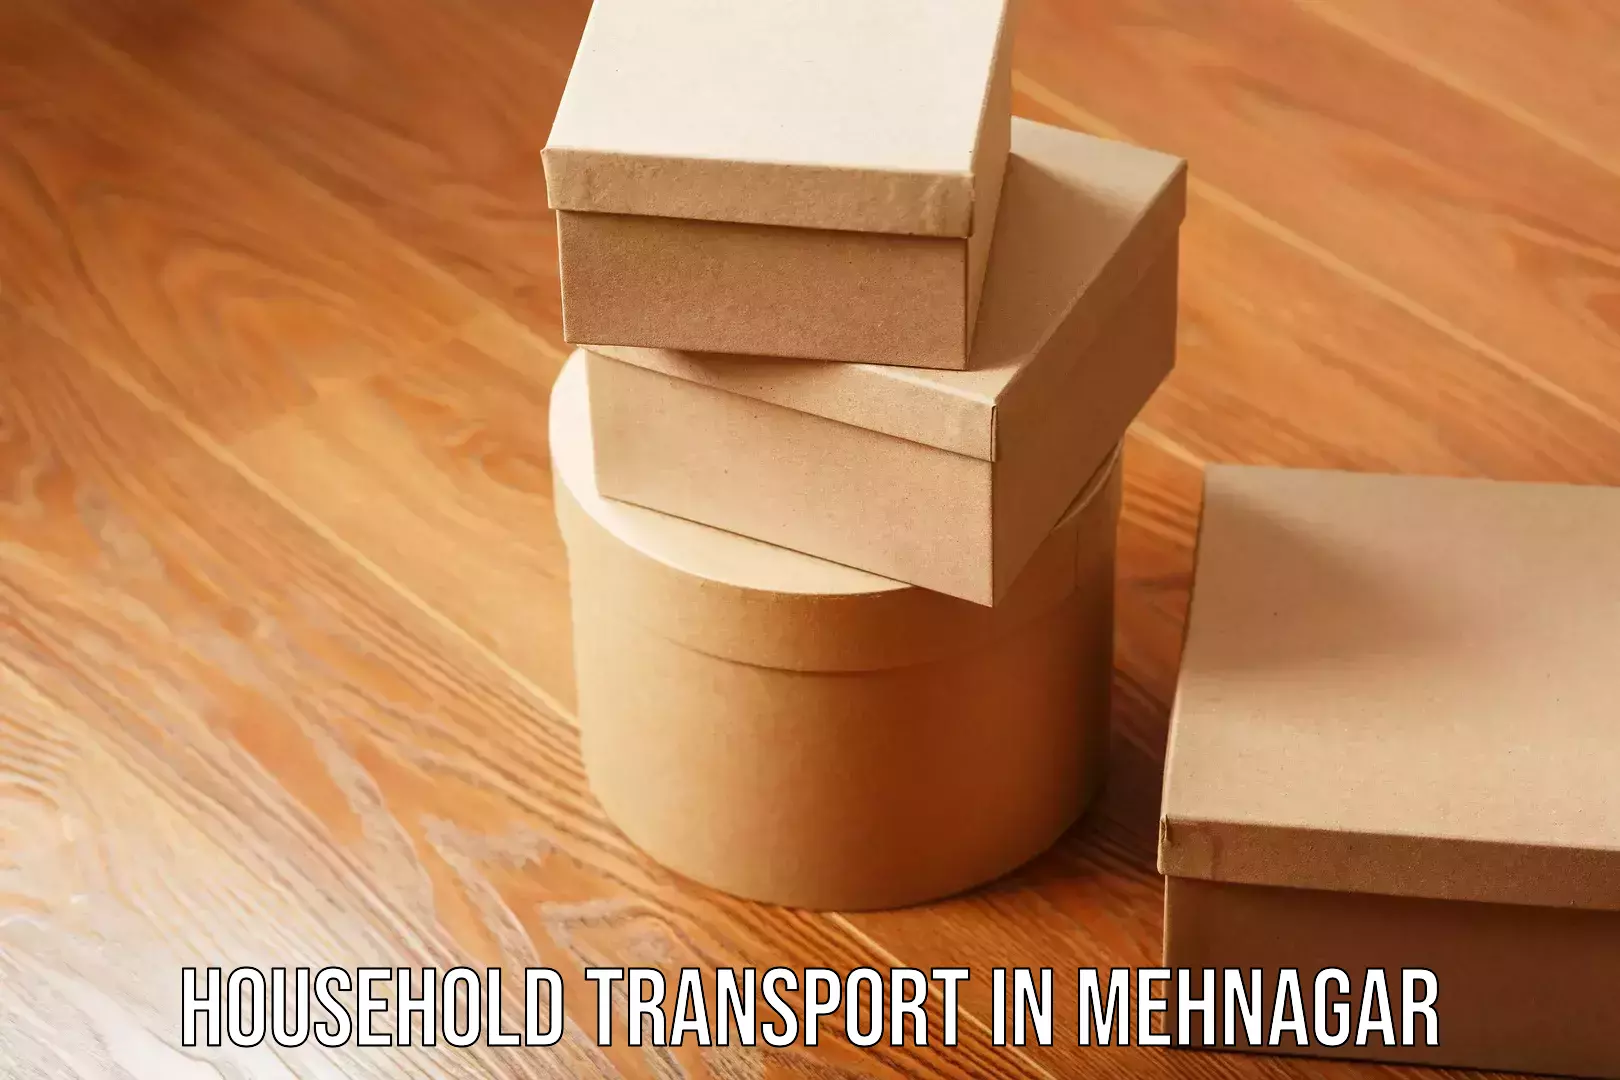 Home goods moving company in Mehnagar